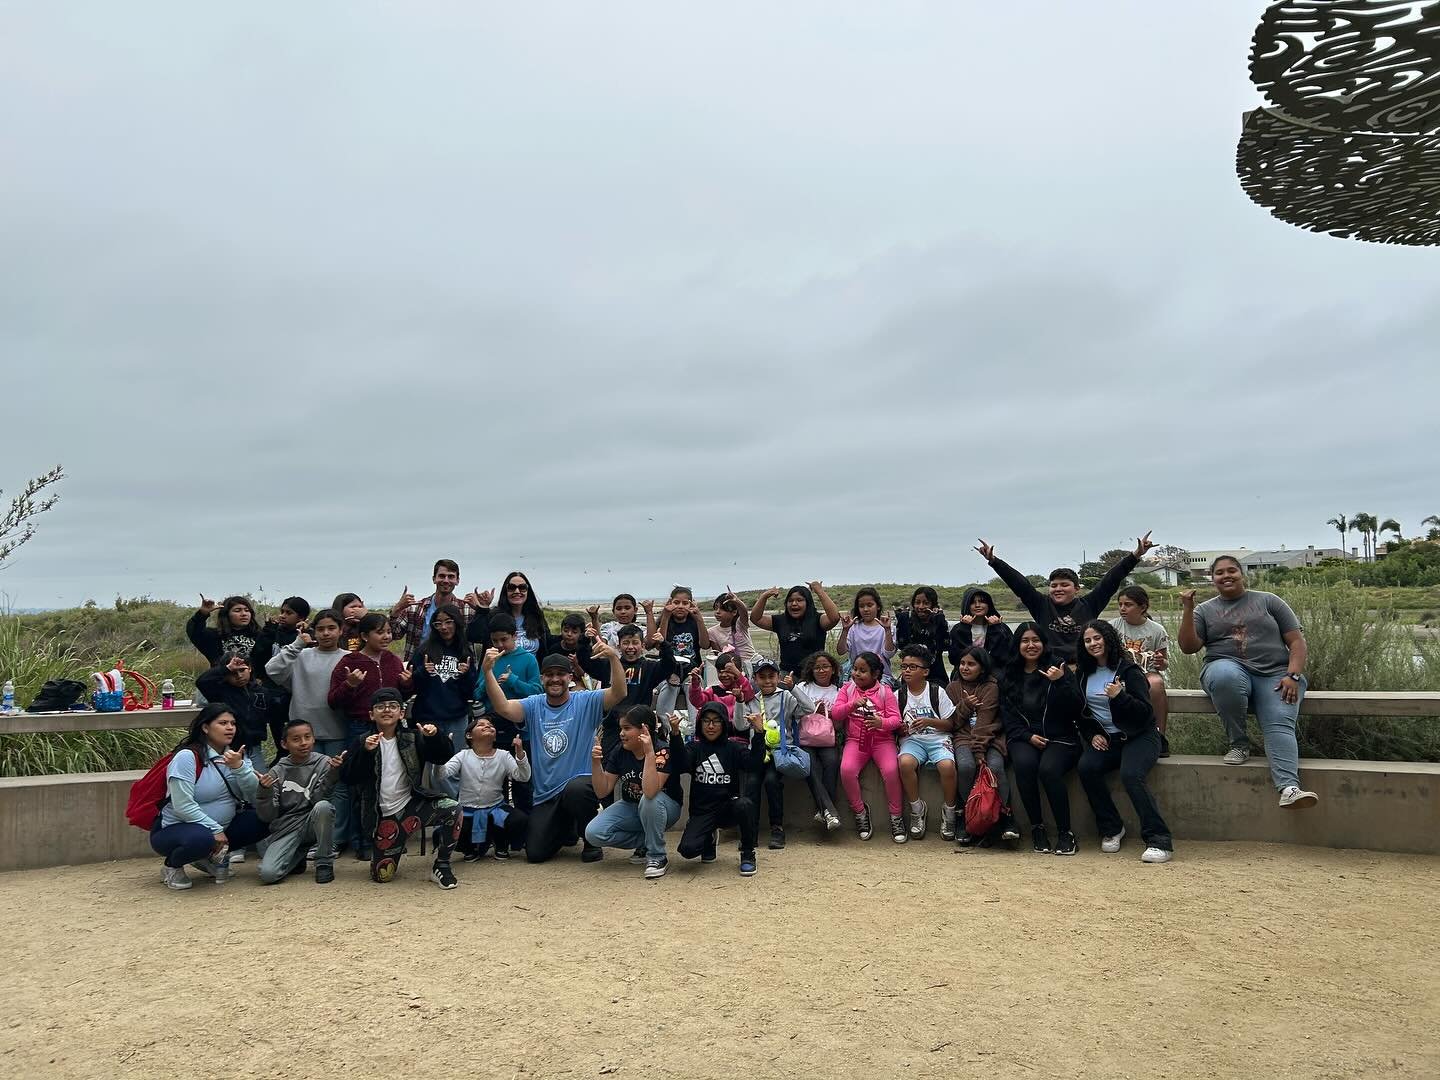 CLF&rsquo;s CAMP FOR ALL PROGRAM IS IN FULL SWING! What an amazing field trip weekend with our wonderful friends at @lasbestafterschool, who joined us at Malibu Lagoon State Beach! With 40 LAUSD students from Boyle Heights  joining us from #lasbestaf